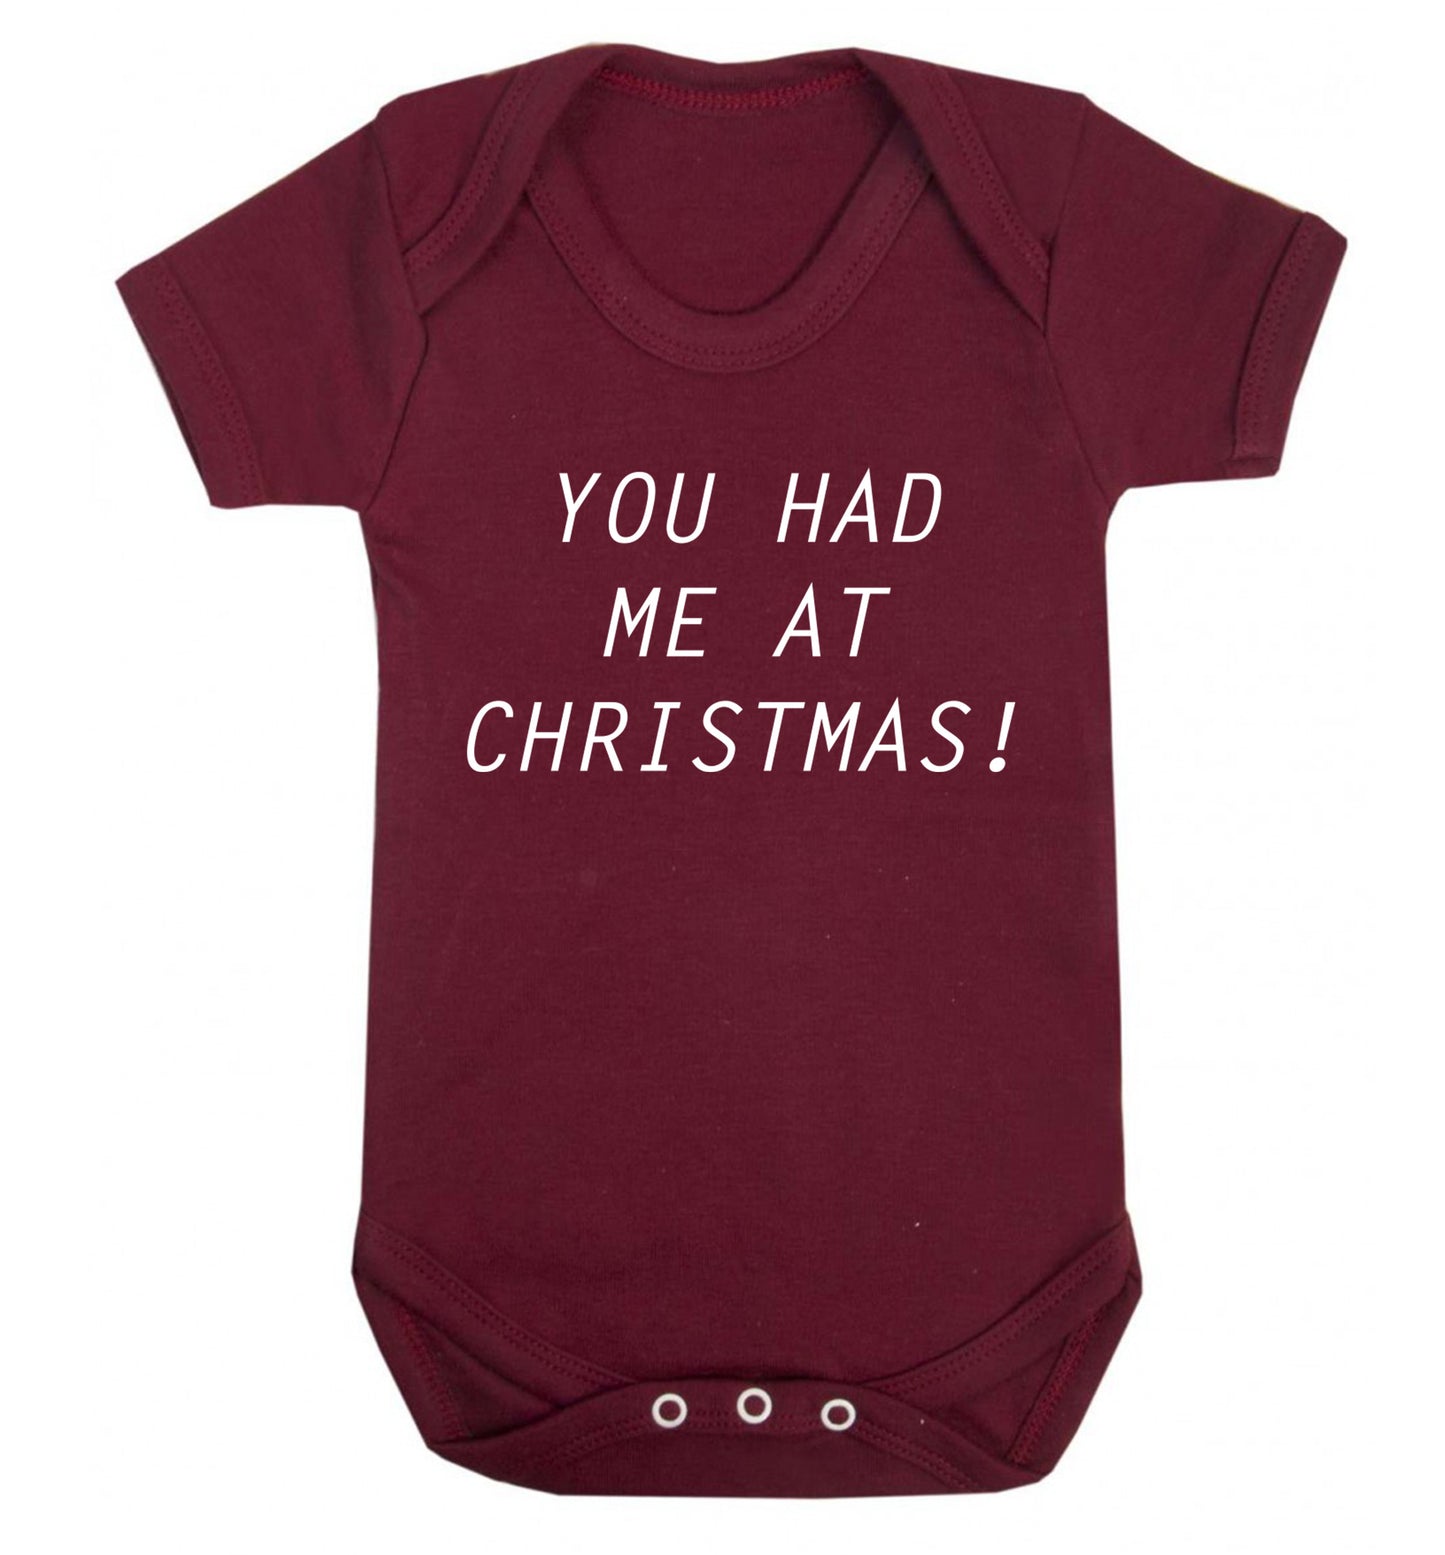 You had me at Christmas Baby Vest maroon 18-24 months